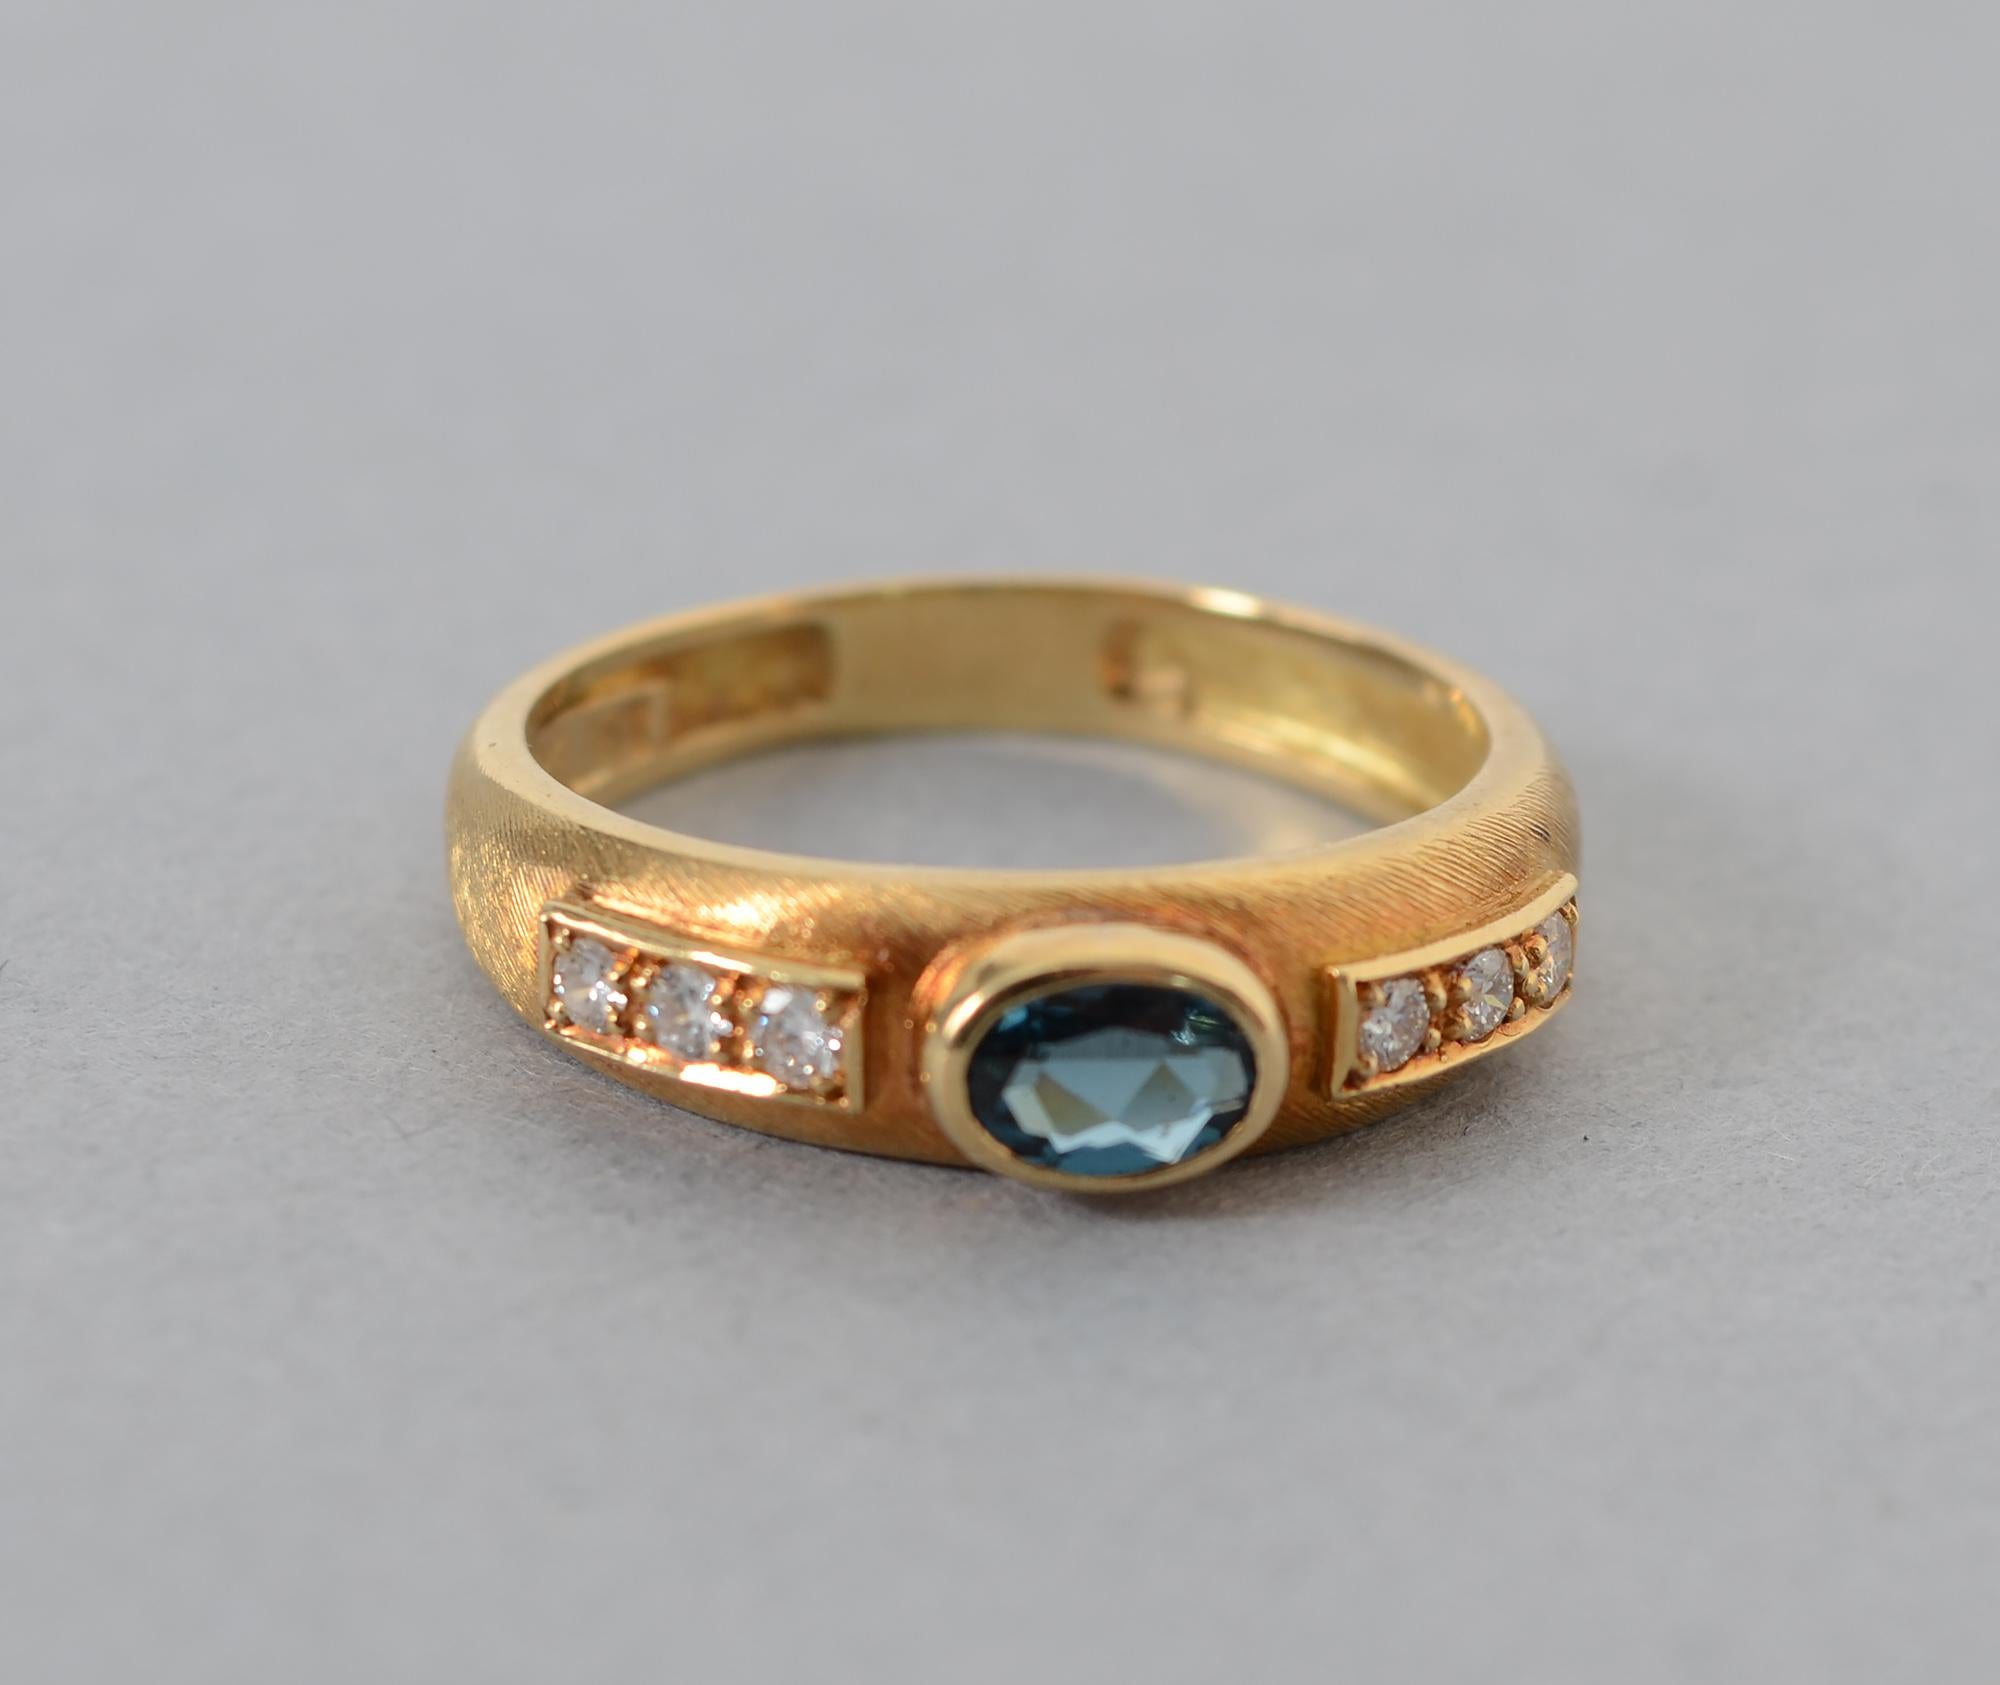 Delicate Burle Marx 18 karat gold ring centered with an oval blue topaz stone and flanked by three diamonds on each side. The ring has the lightly brushed finish often seen in Marx's work.
The ring is size 8 and can be sized up or down.
It is